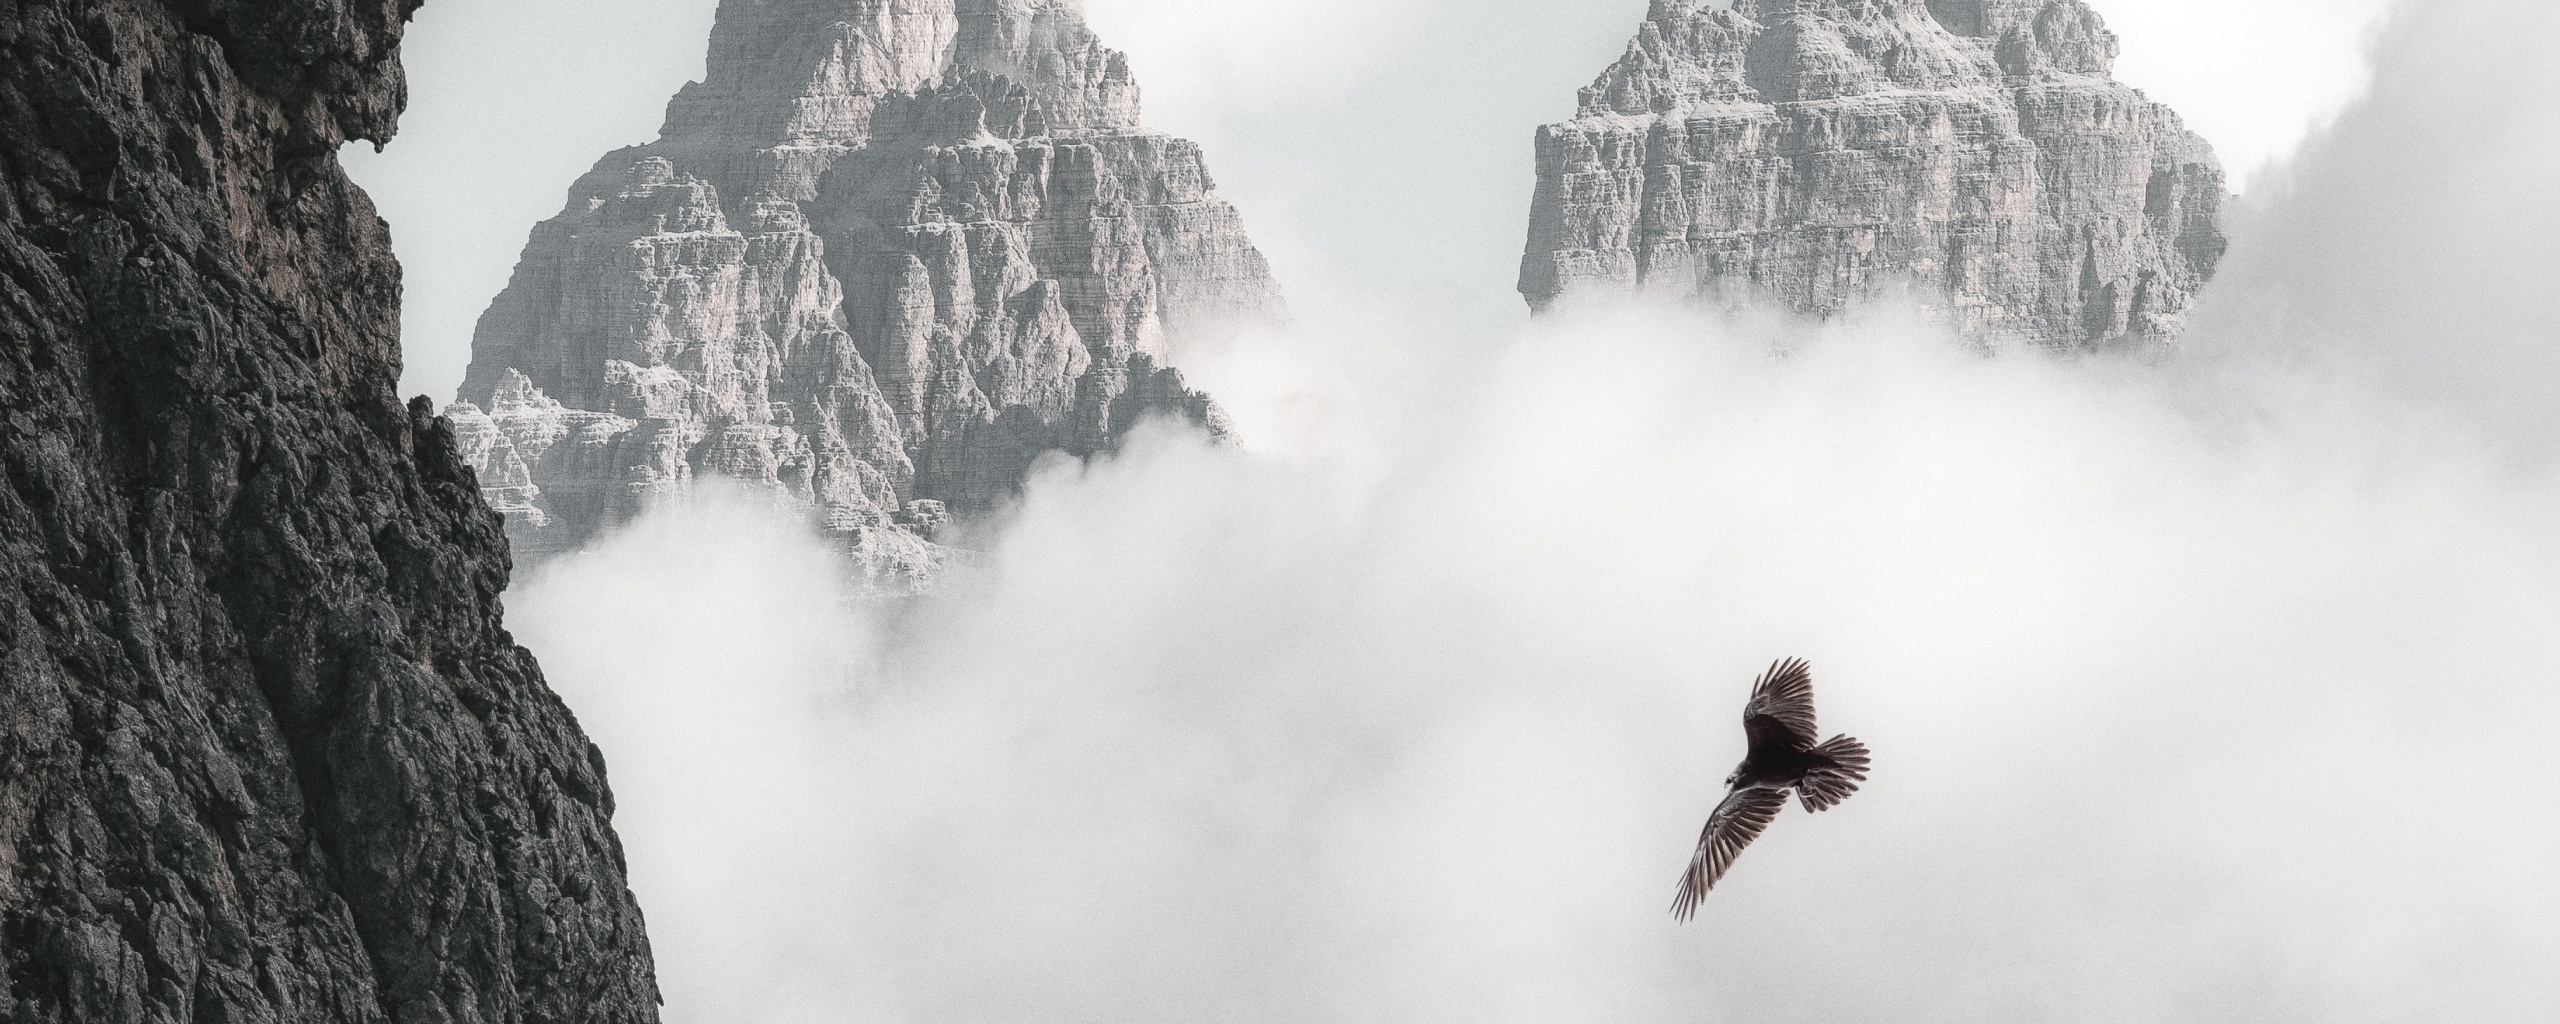 Bald Eagle Flying Through Clouds And Mountains 4k (click to view) HD Wallpapers in 2560x1024 Resolution